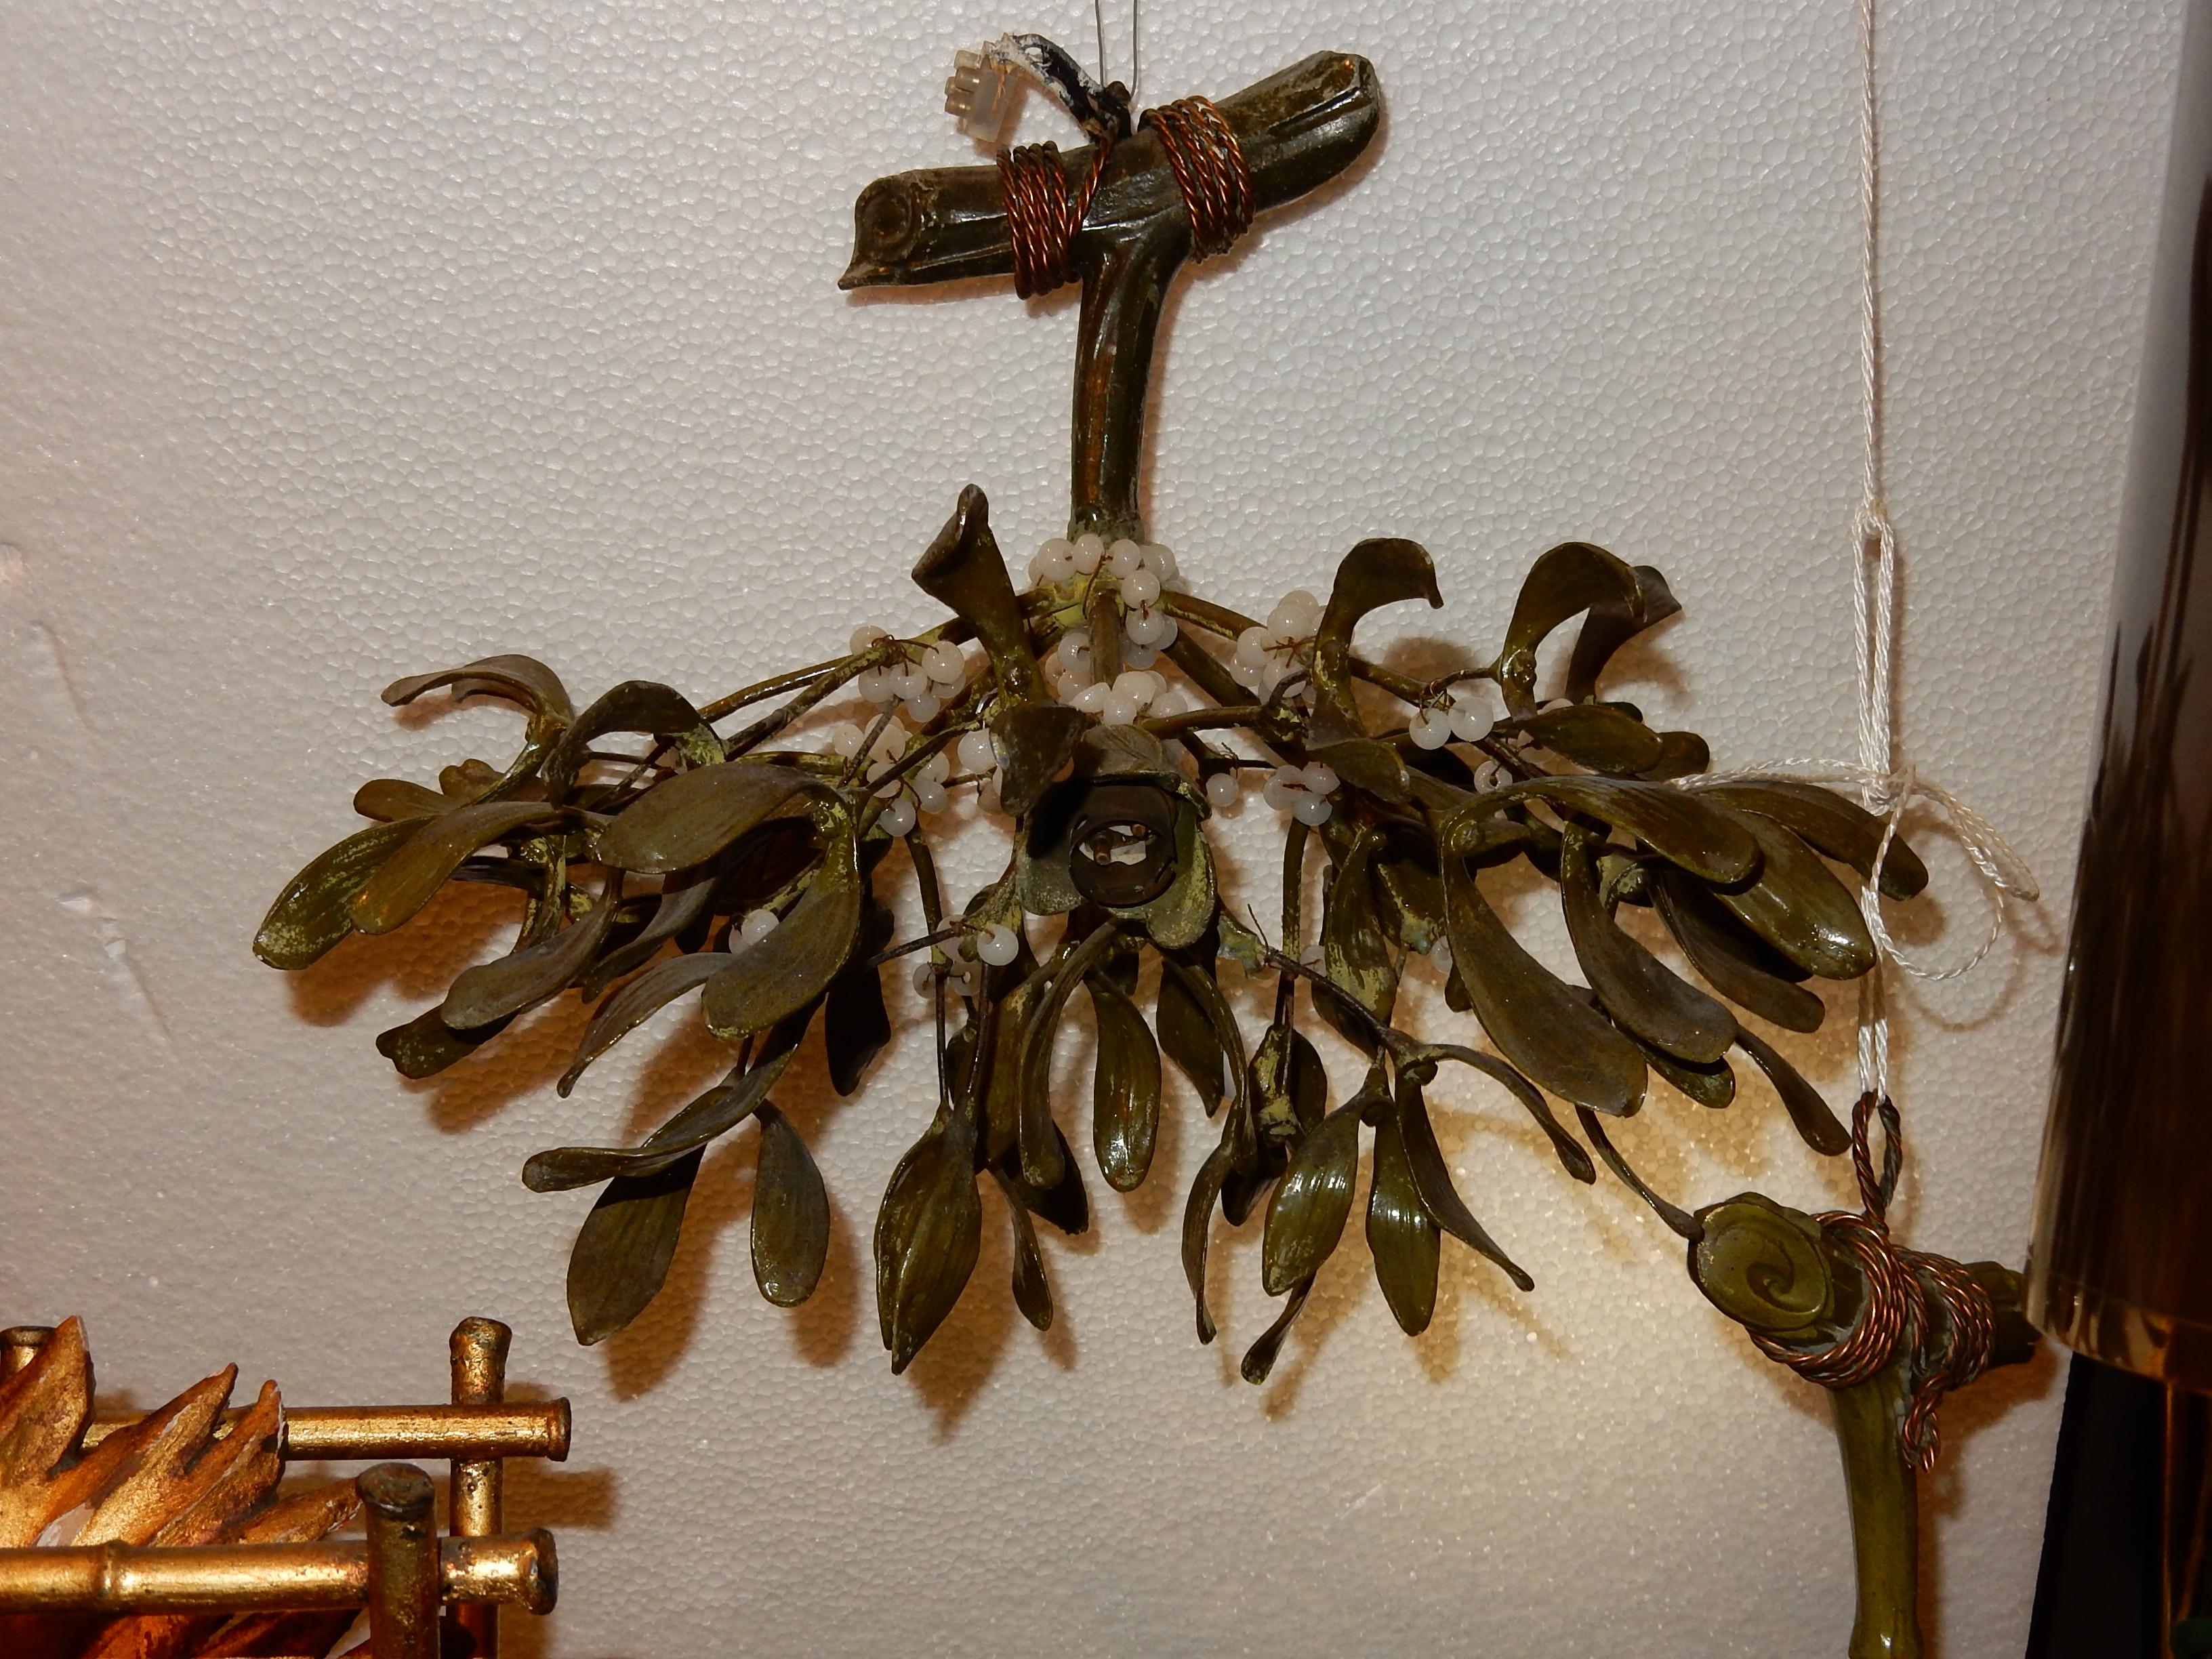 Chandelier mistletoe in brass patined with opaline pearls, circa 1900
Good condition. Measures: 45cm diameter.